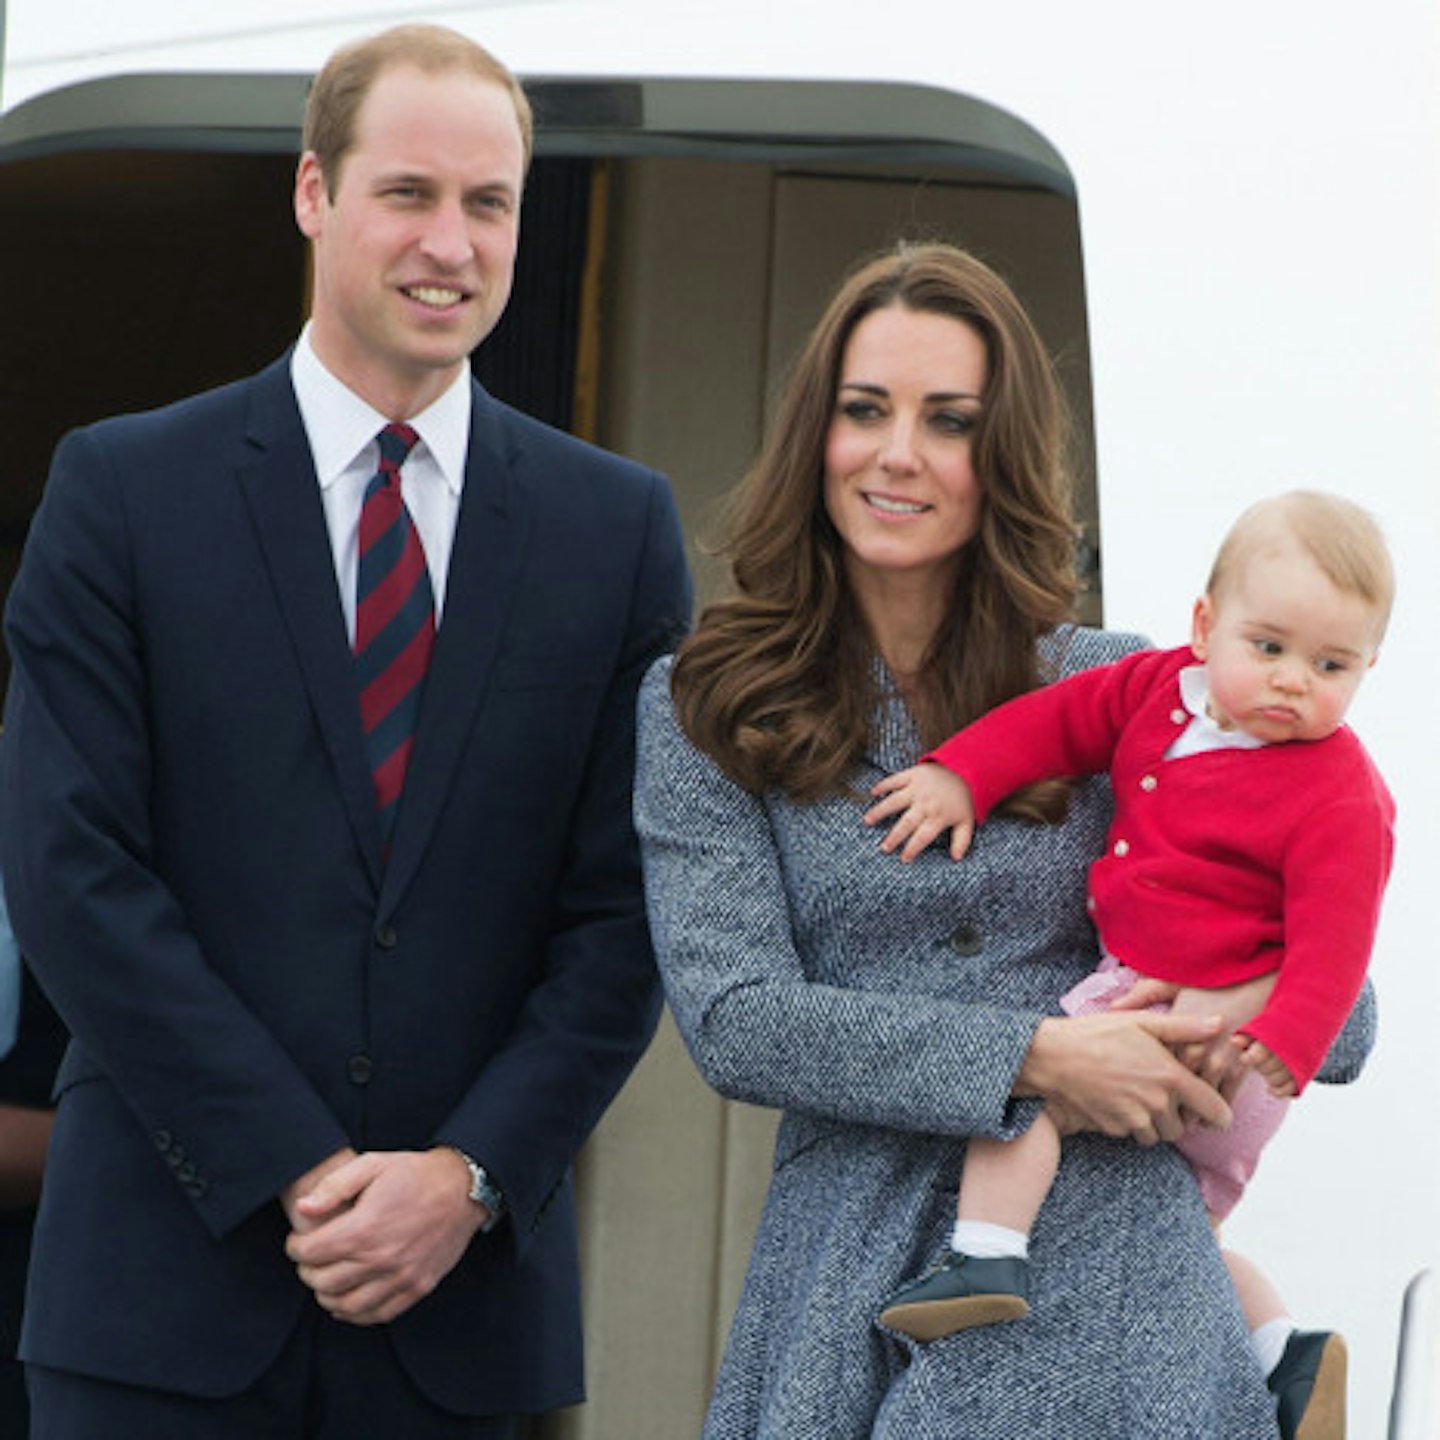 Wills and Kate recently announced that they're expecting their second child